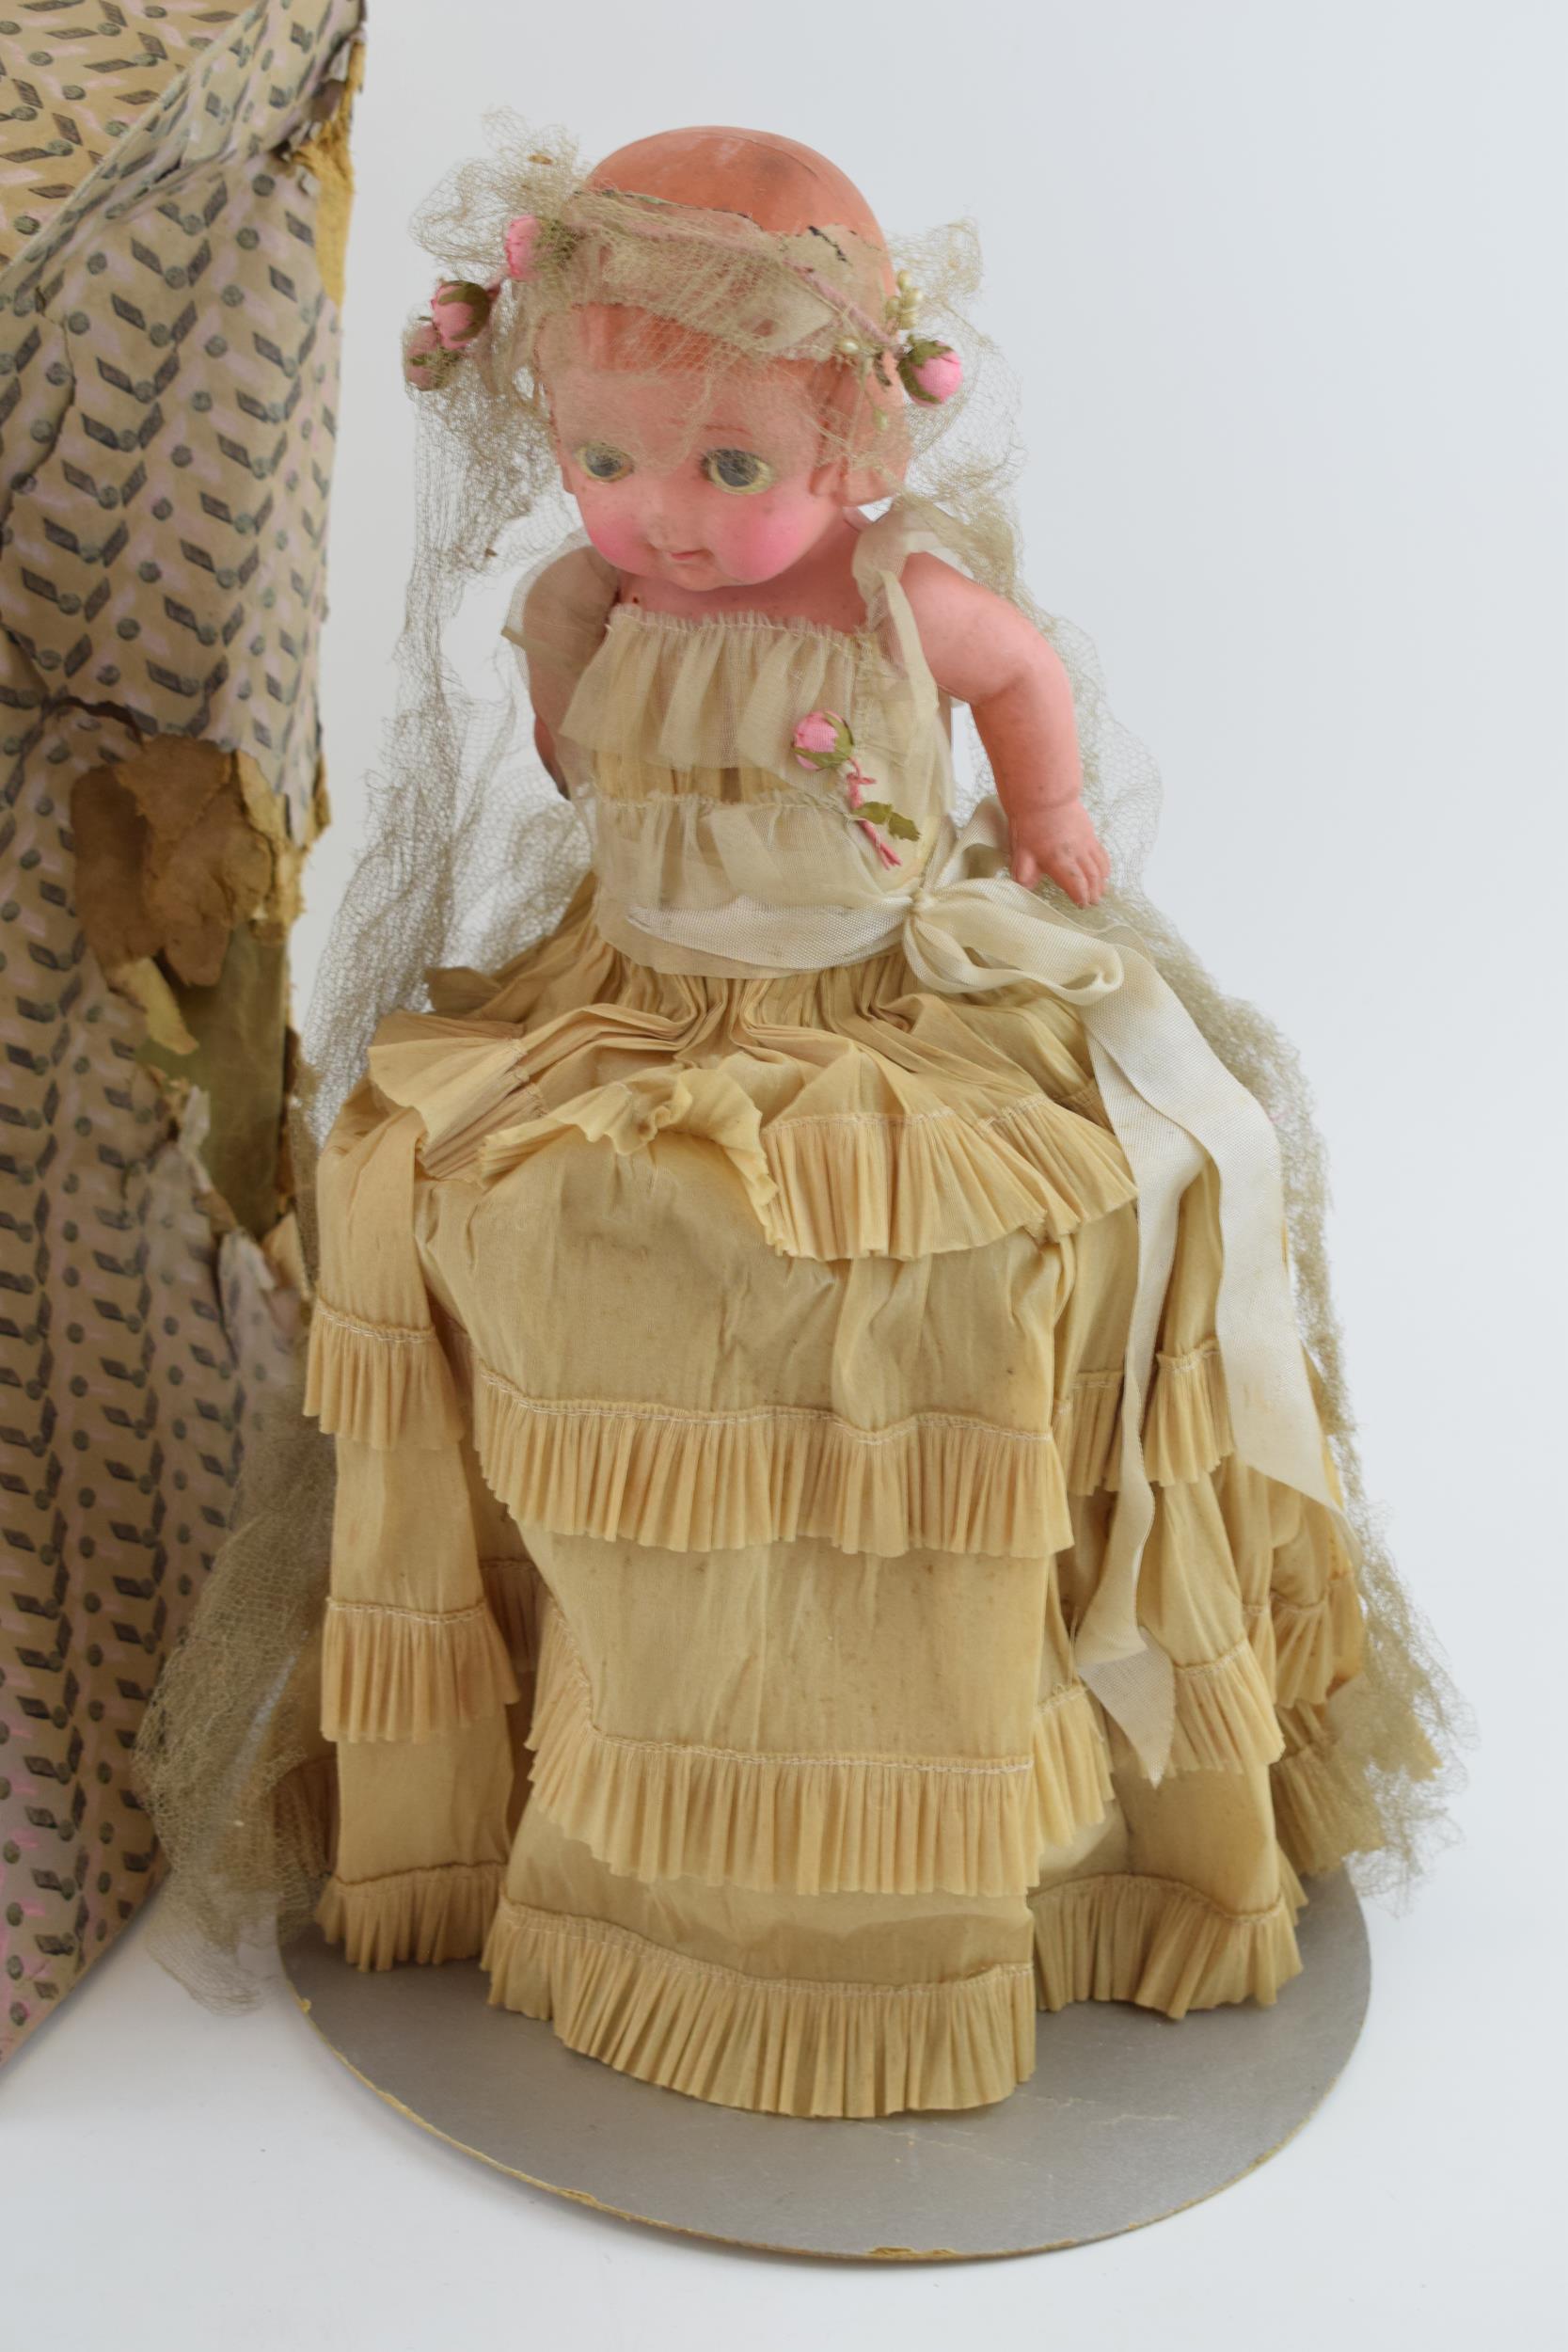 Boxed doll with paper dress, made in England, 'Pomeranian'. Height 40cm. Doll has survived well. - Image 2 of 4